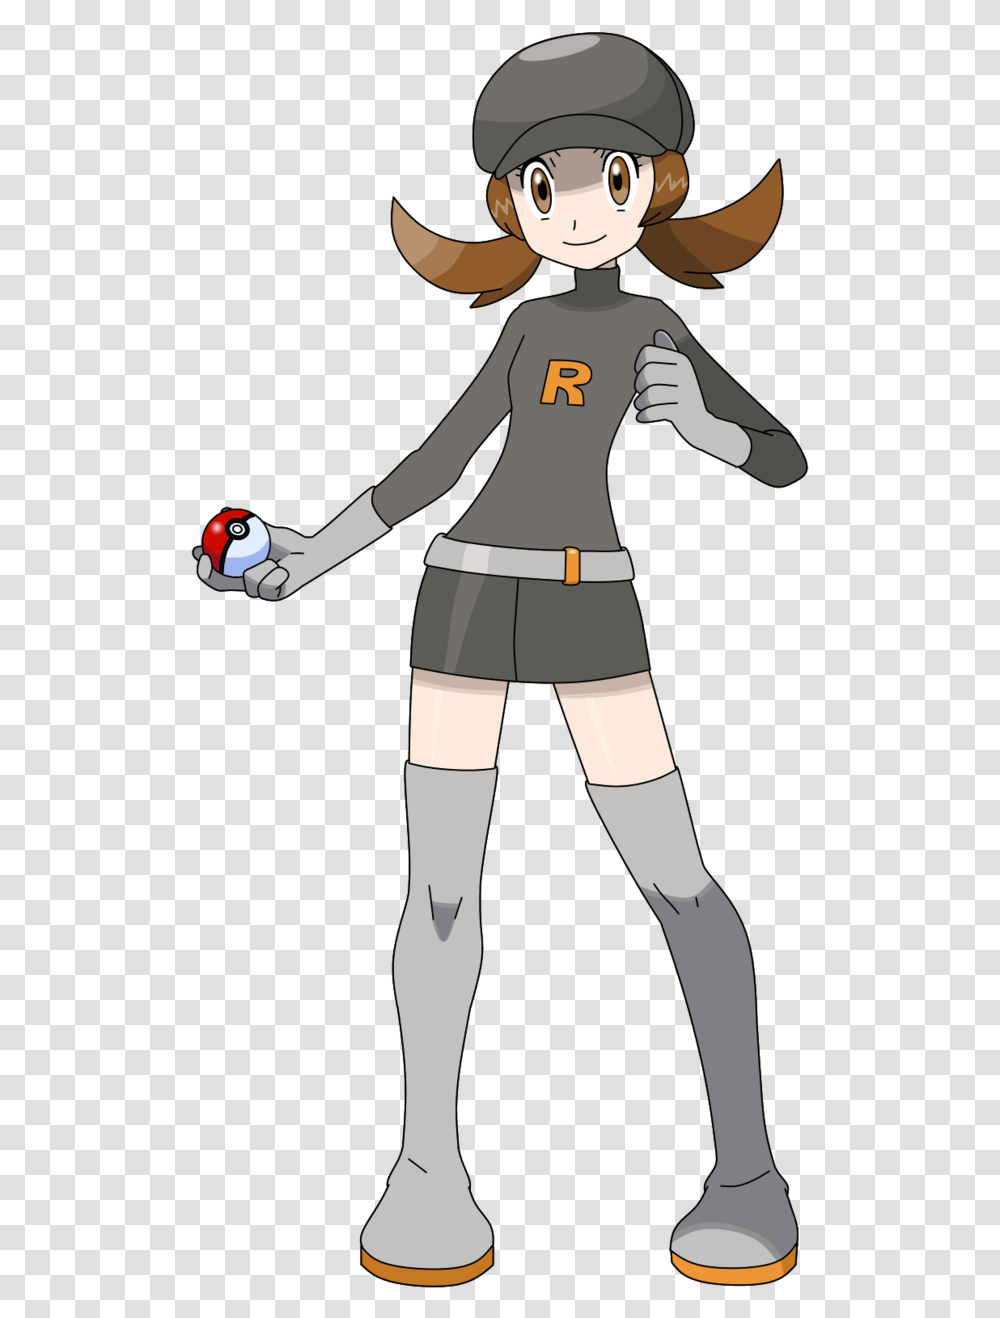 Lyra Team Rocket Outfit By Morki95 Pokemon Lyra Team Rocket, Person, Costume, People Transparent Png